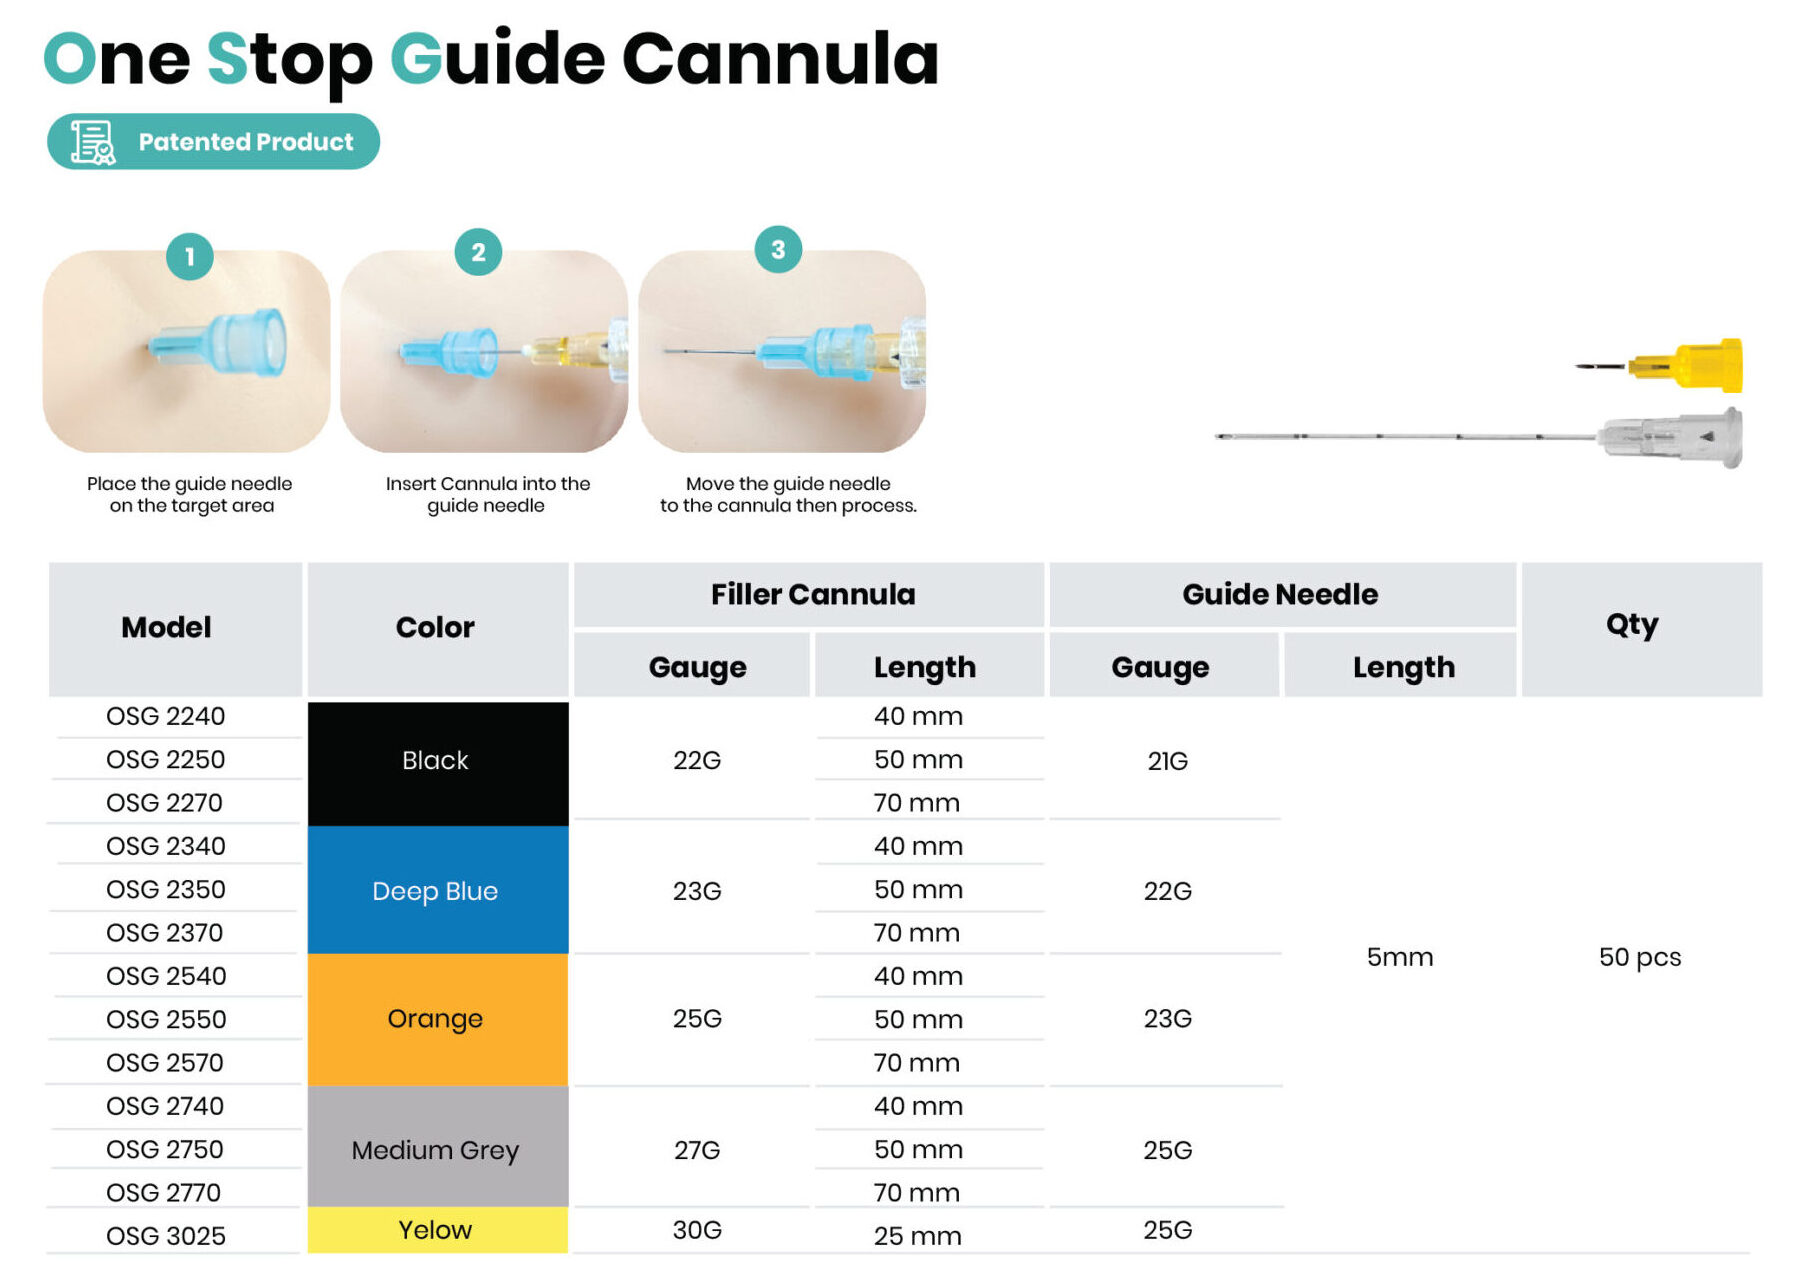 One Stop Guide Cannula